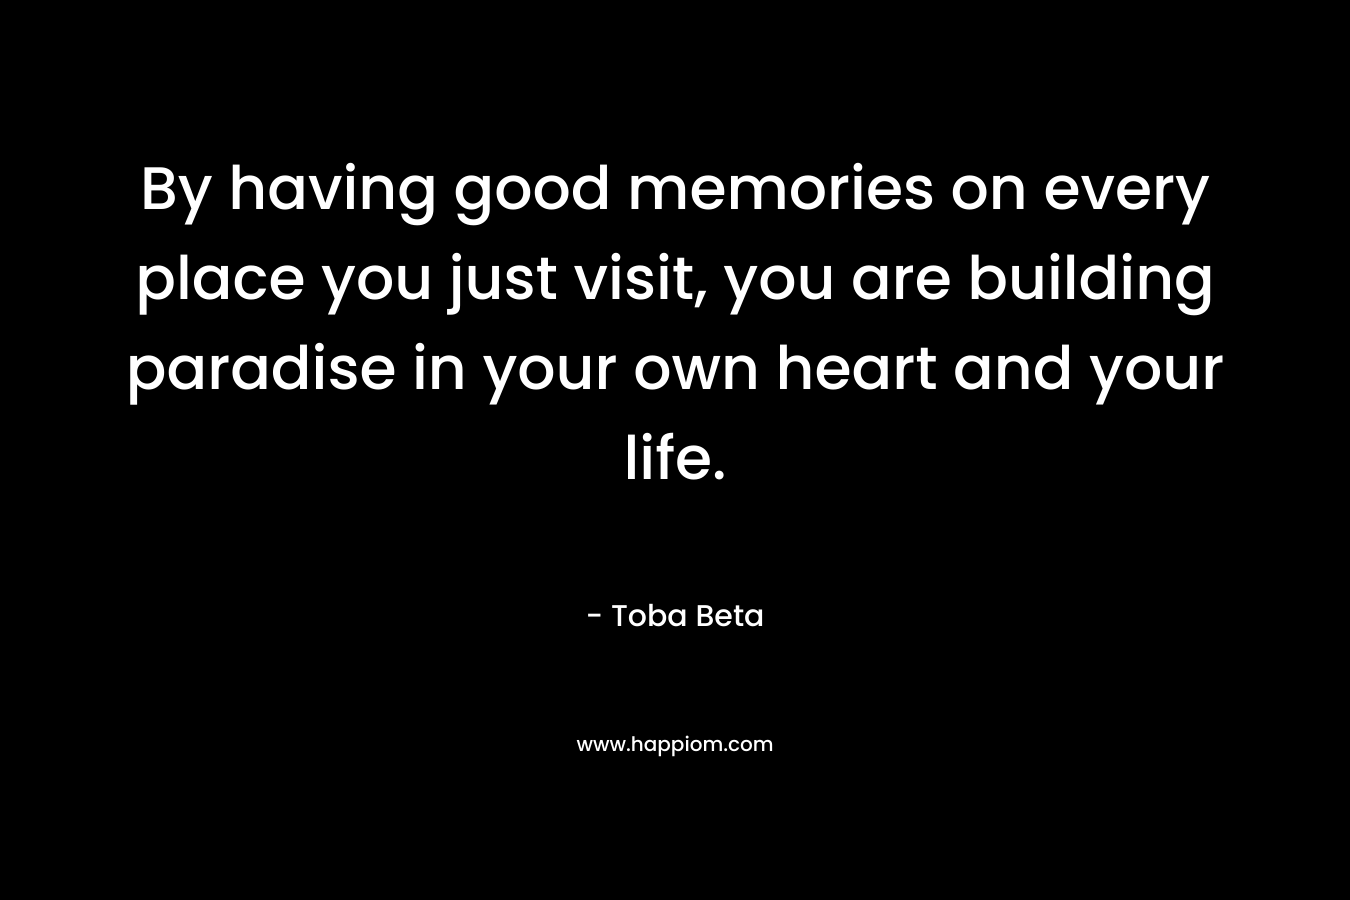 By having good memories on every place you just visit, you are building paradise in your own heart and your life.